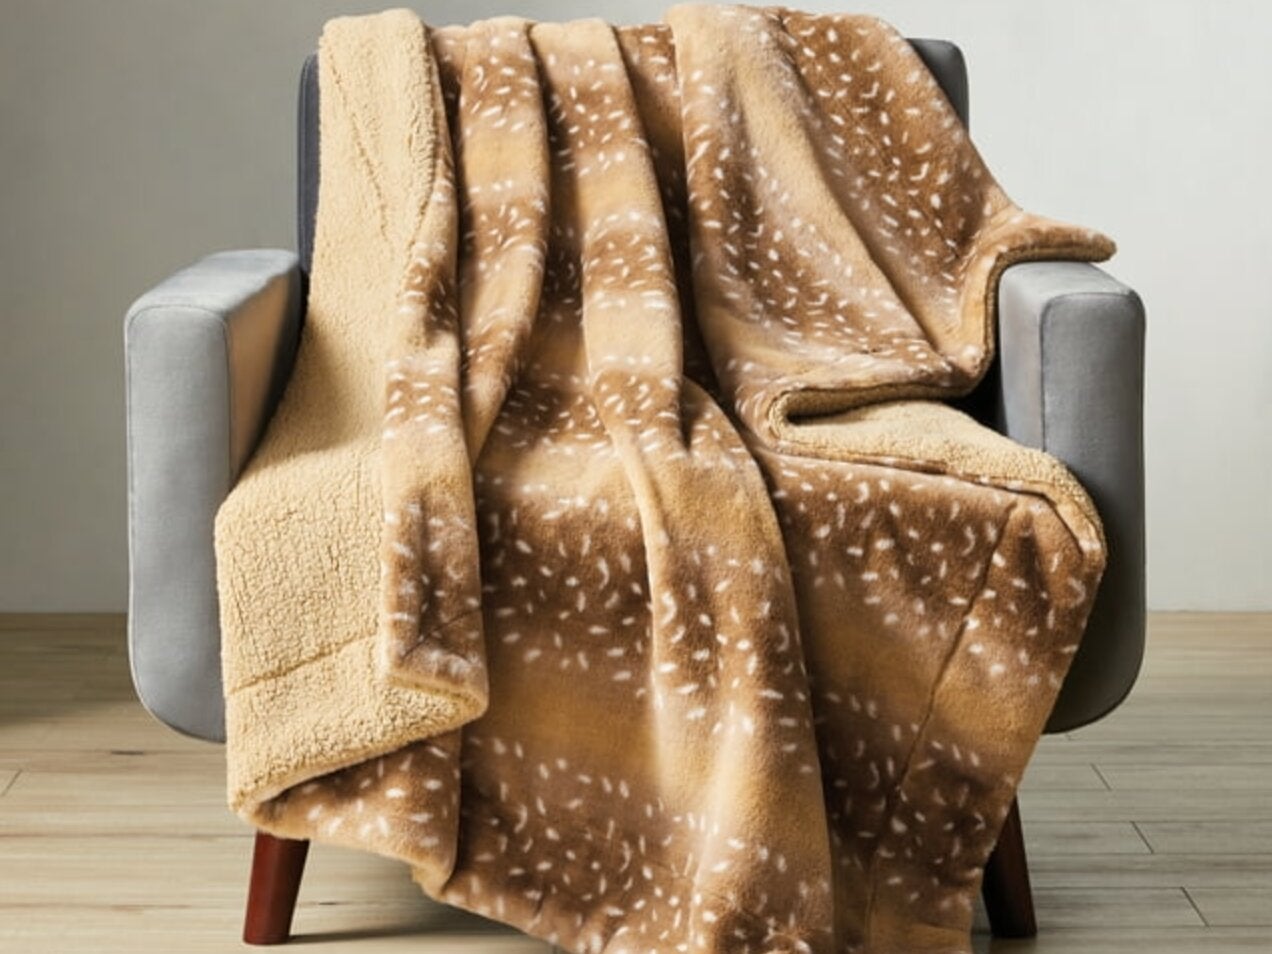 Get Wrapped Up In These Cozy Throw Blankets